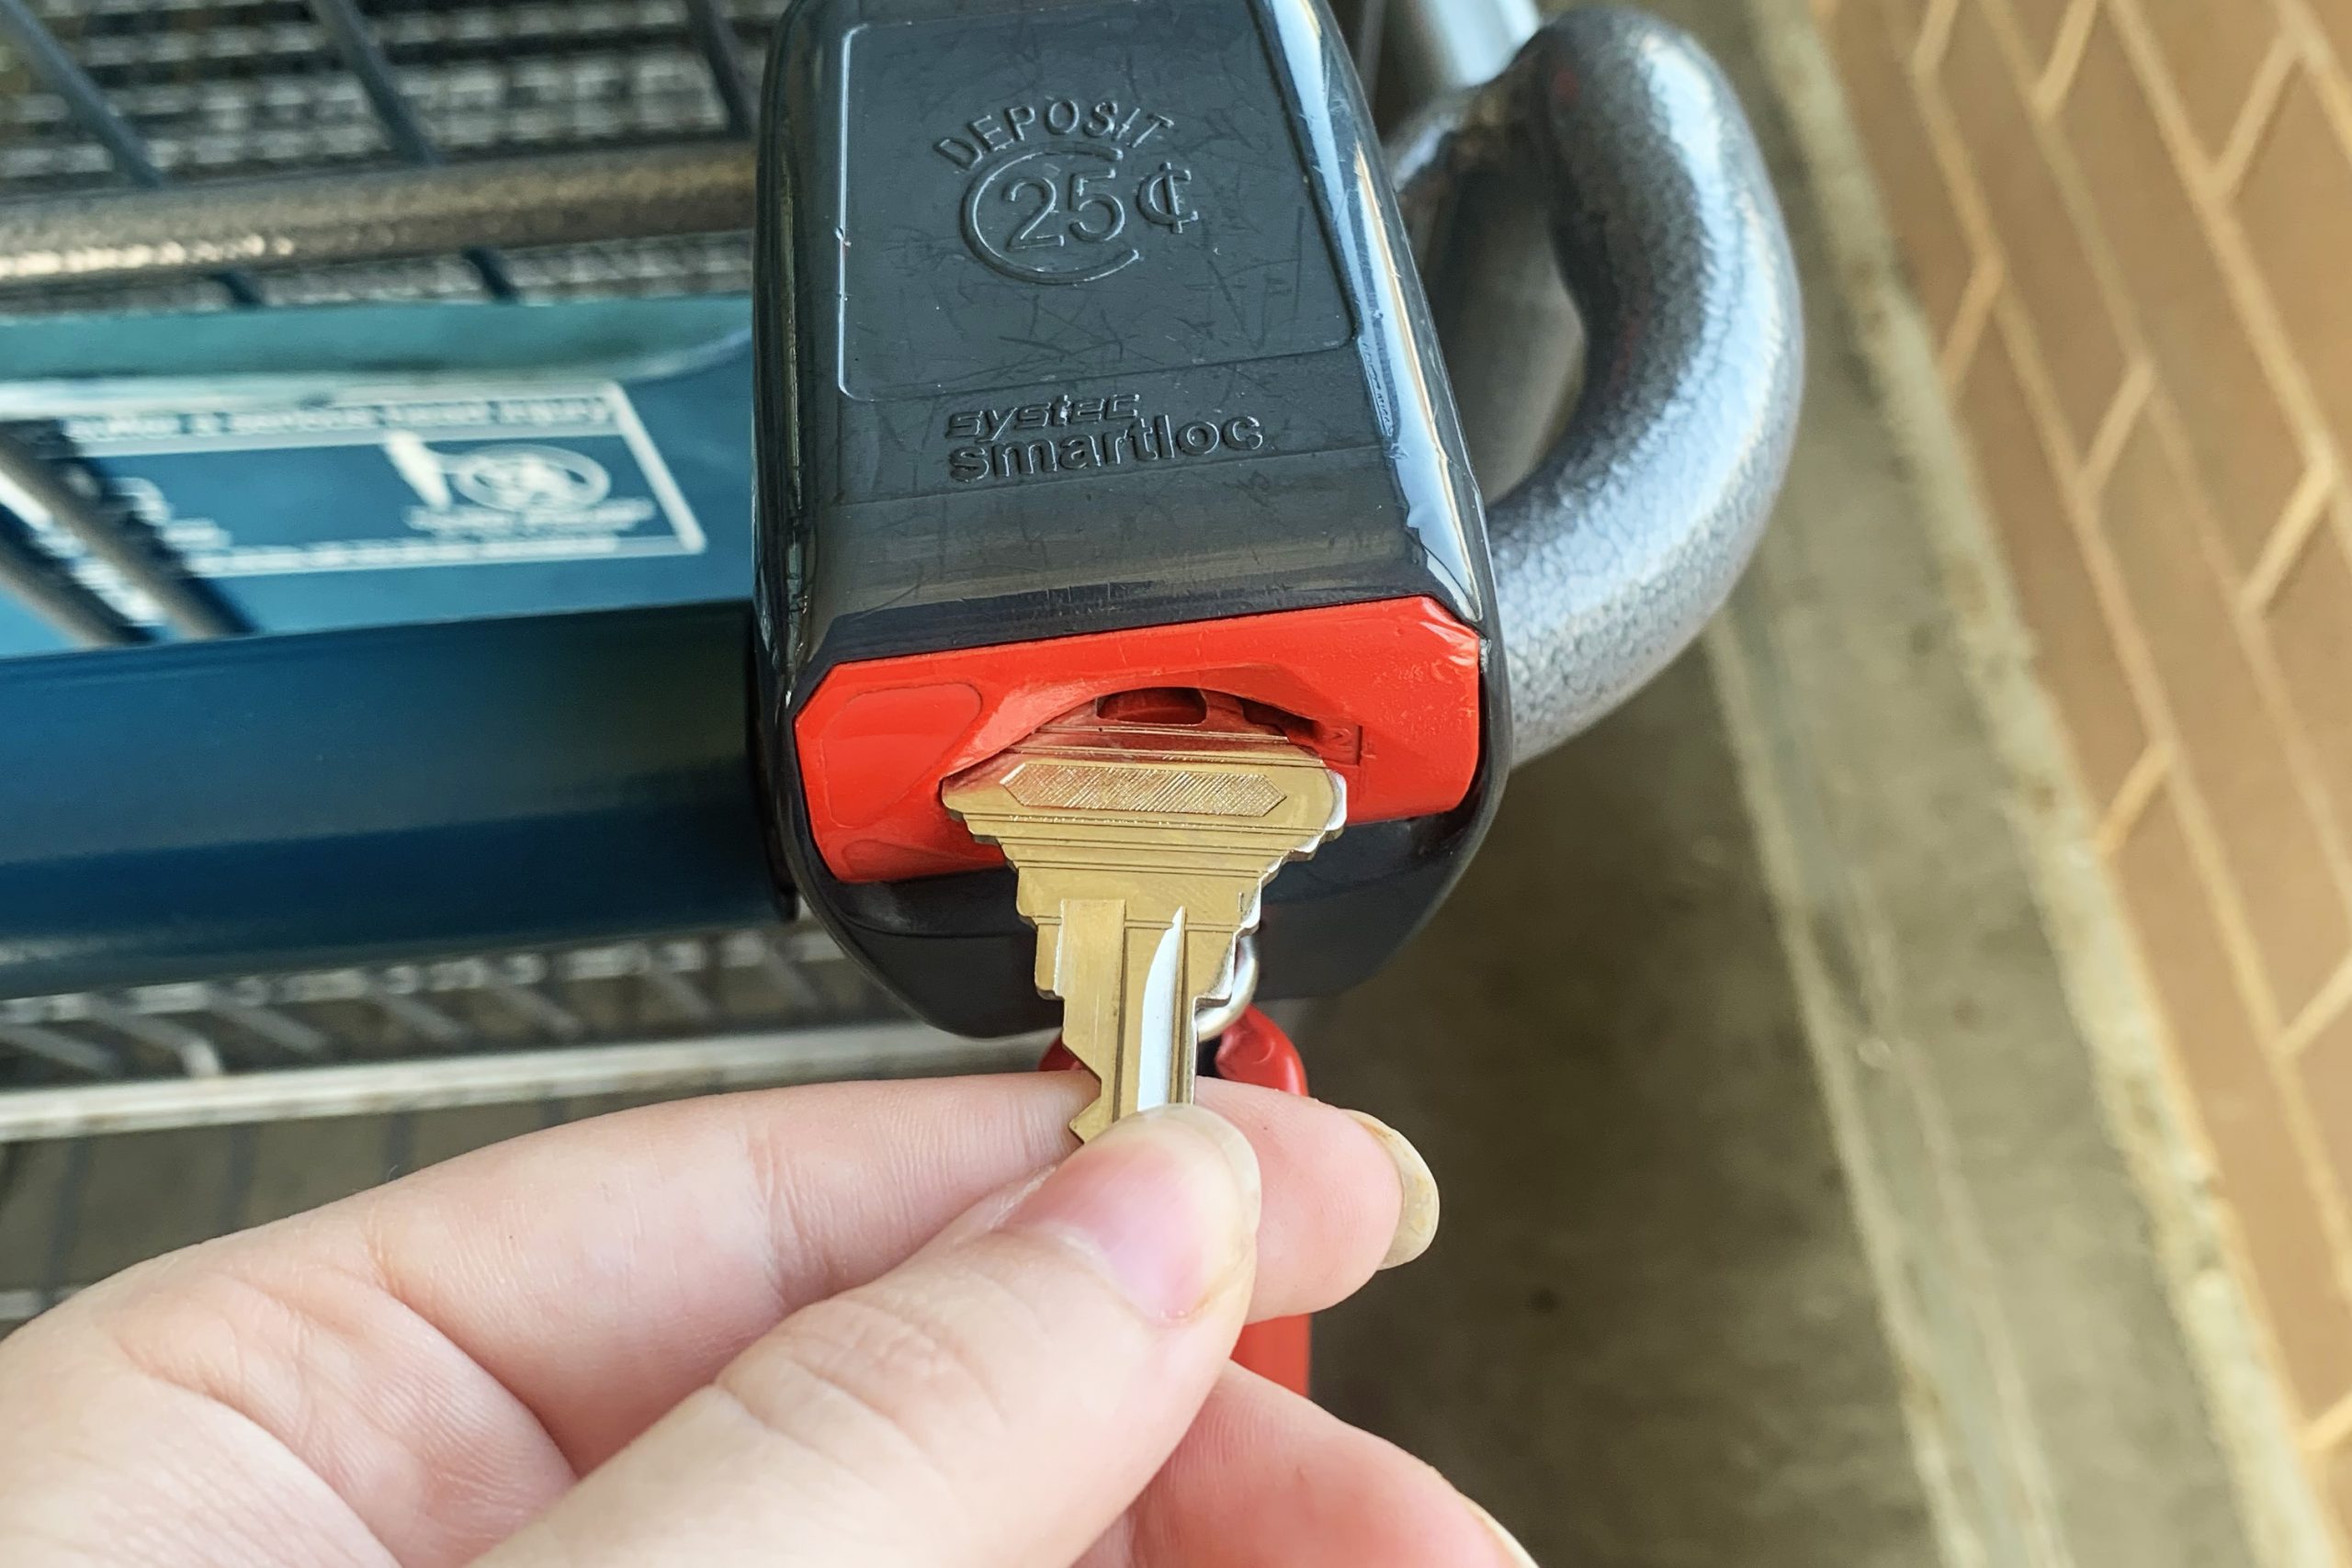 Trick lock. Do you need a key to open it? 